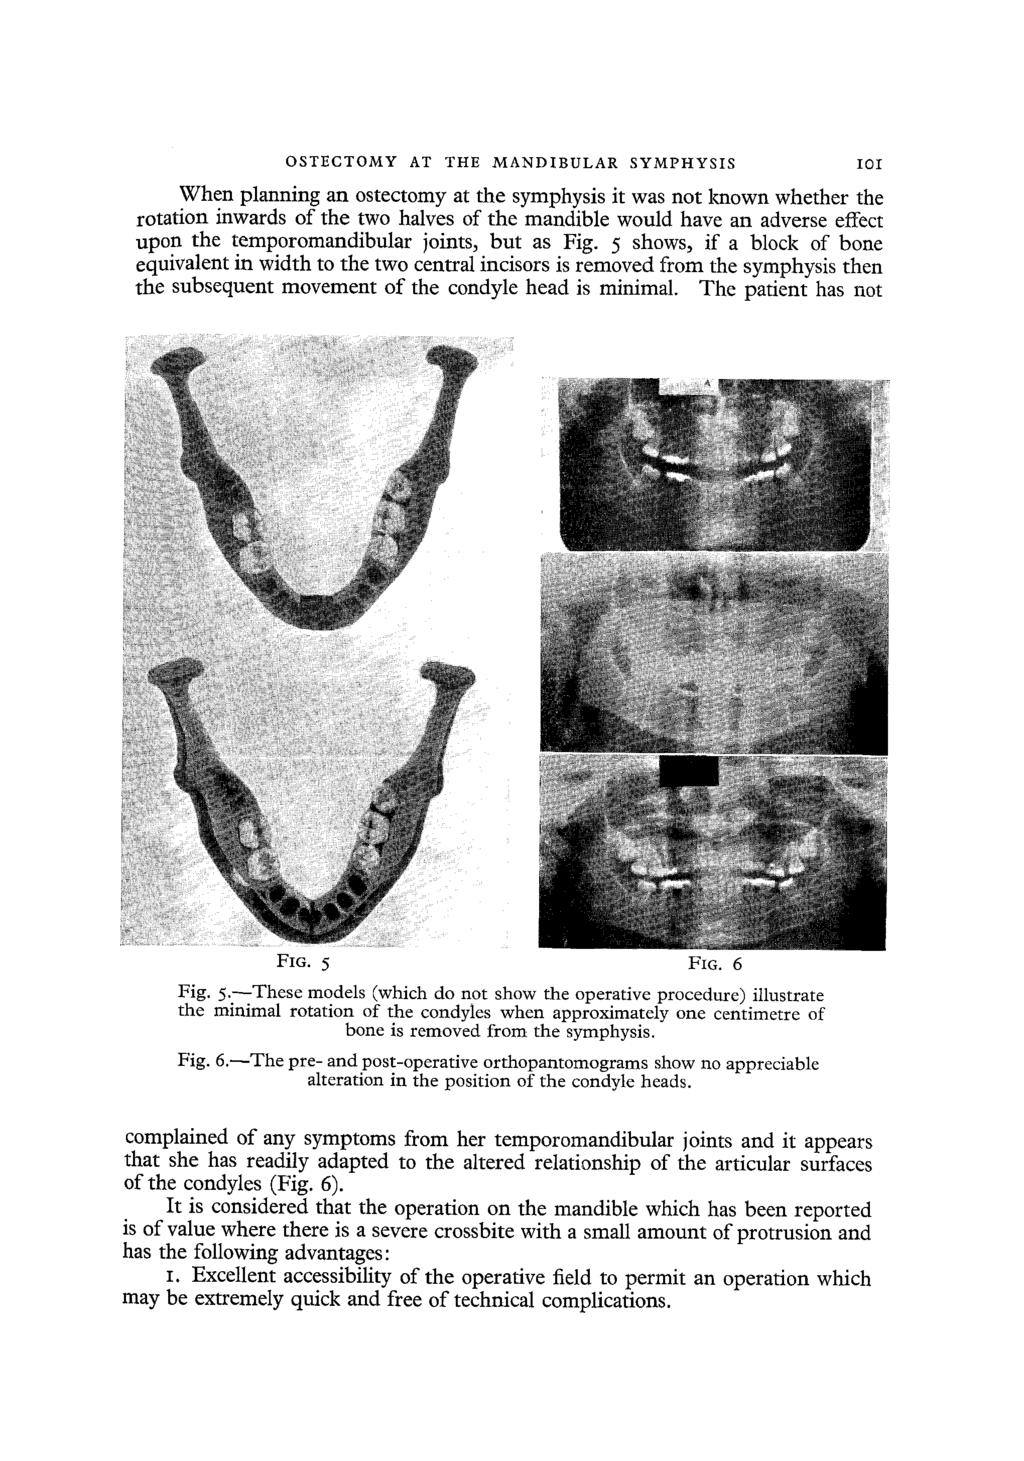 OSTECTOMY AT THE MANDIBULAR SYMPHYSIS When planning an ostectomy at the symphysis it was not known whether the rotation inwards of the two halves of the mandible would have an adverse effect upon the